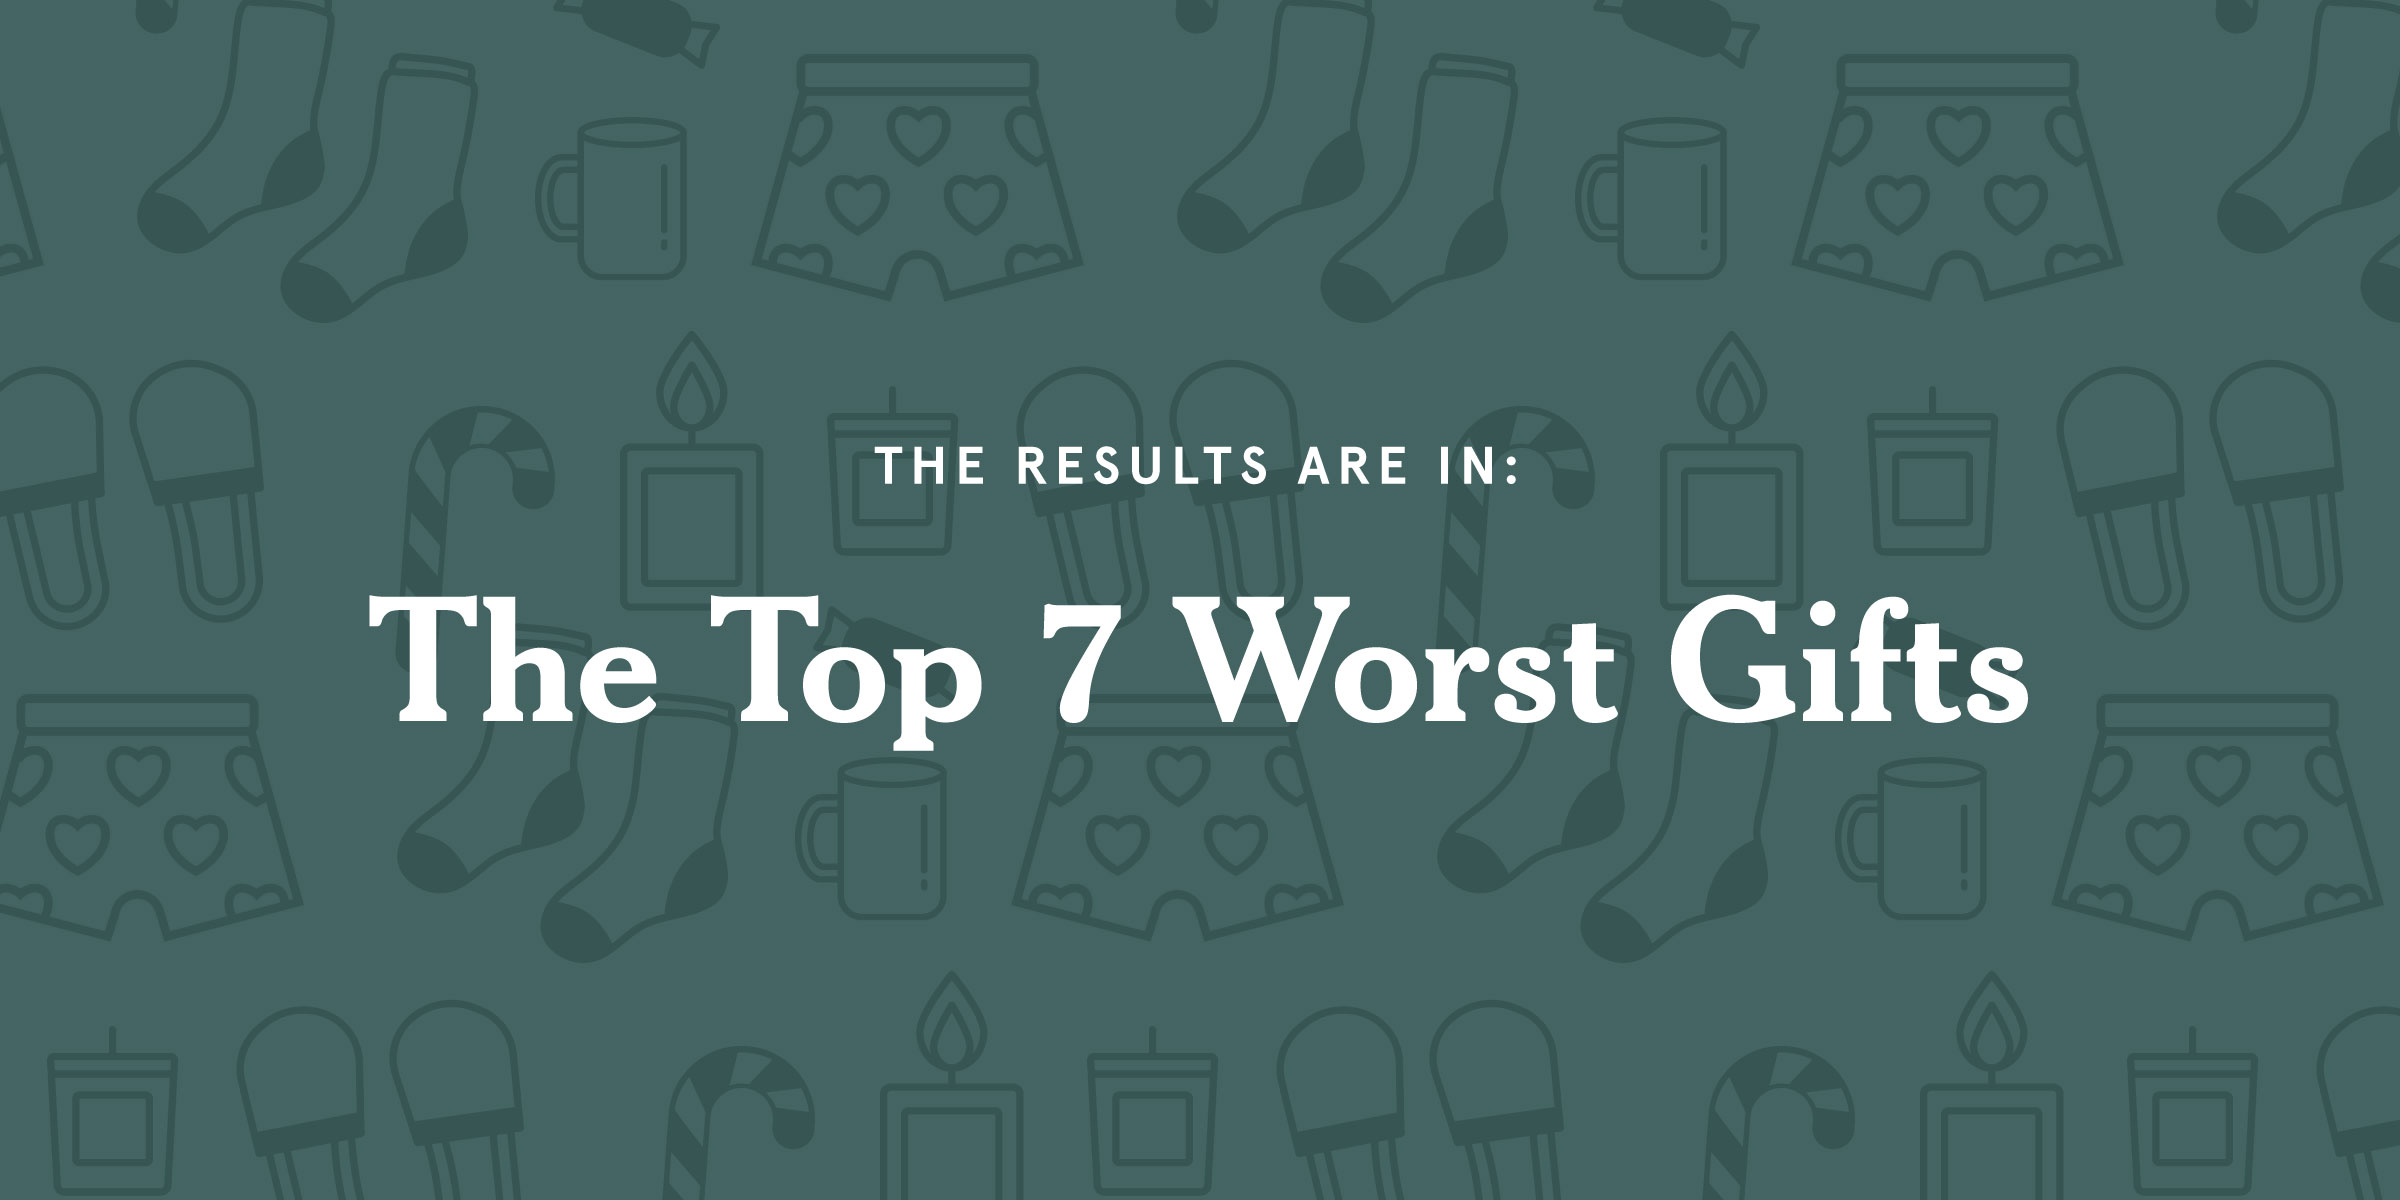 The 7 Worst Gifts graphic